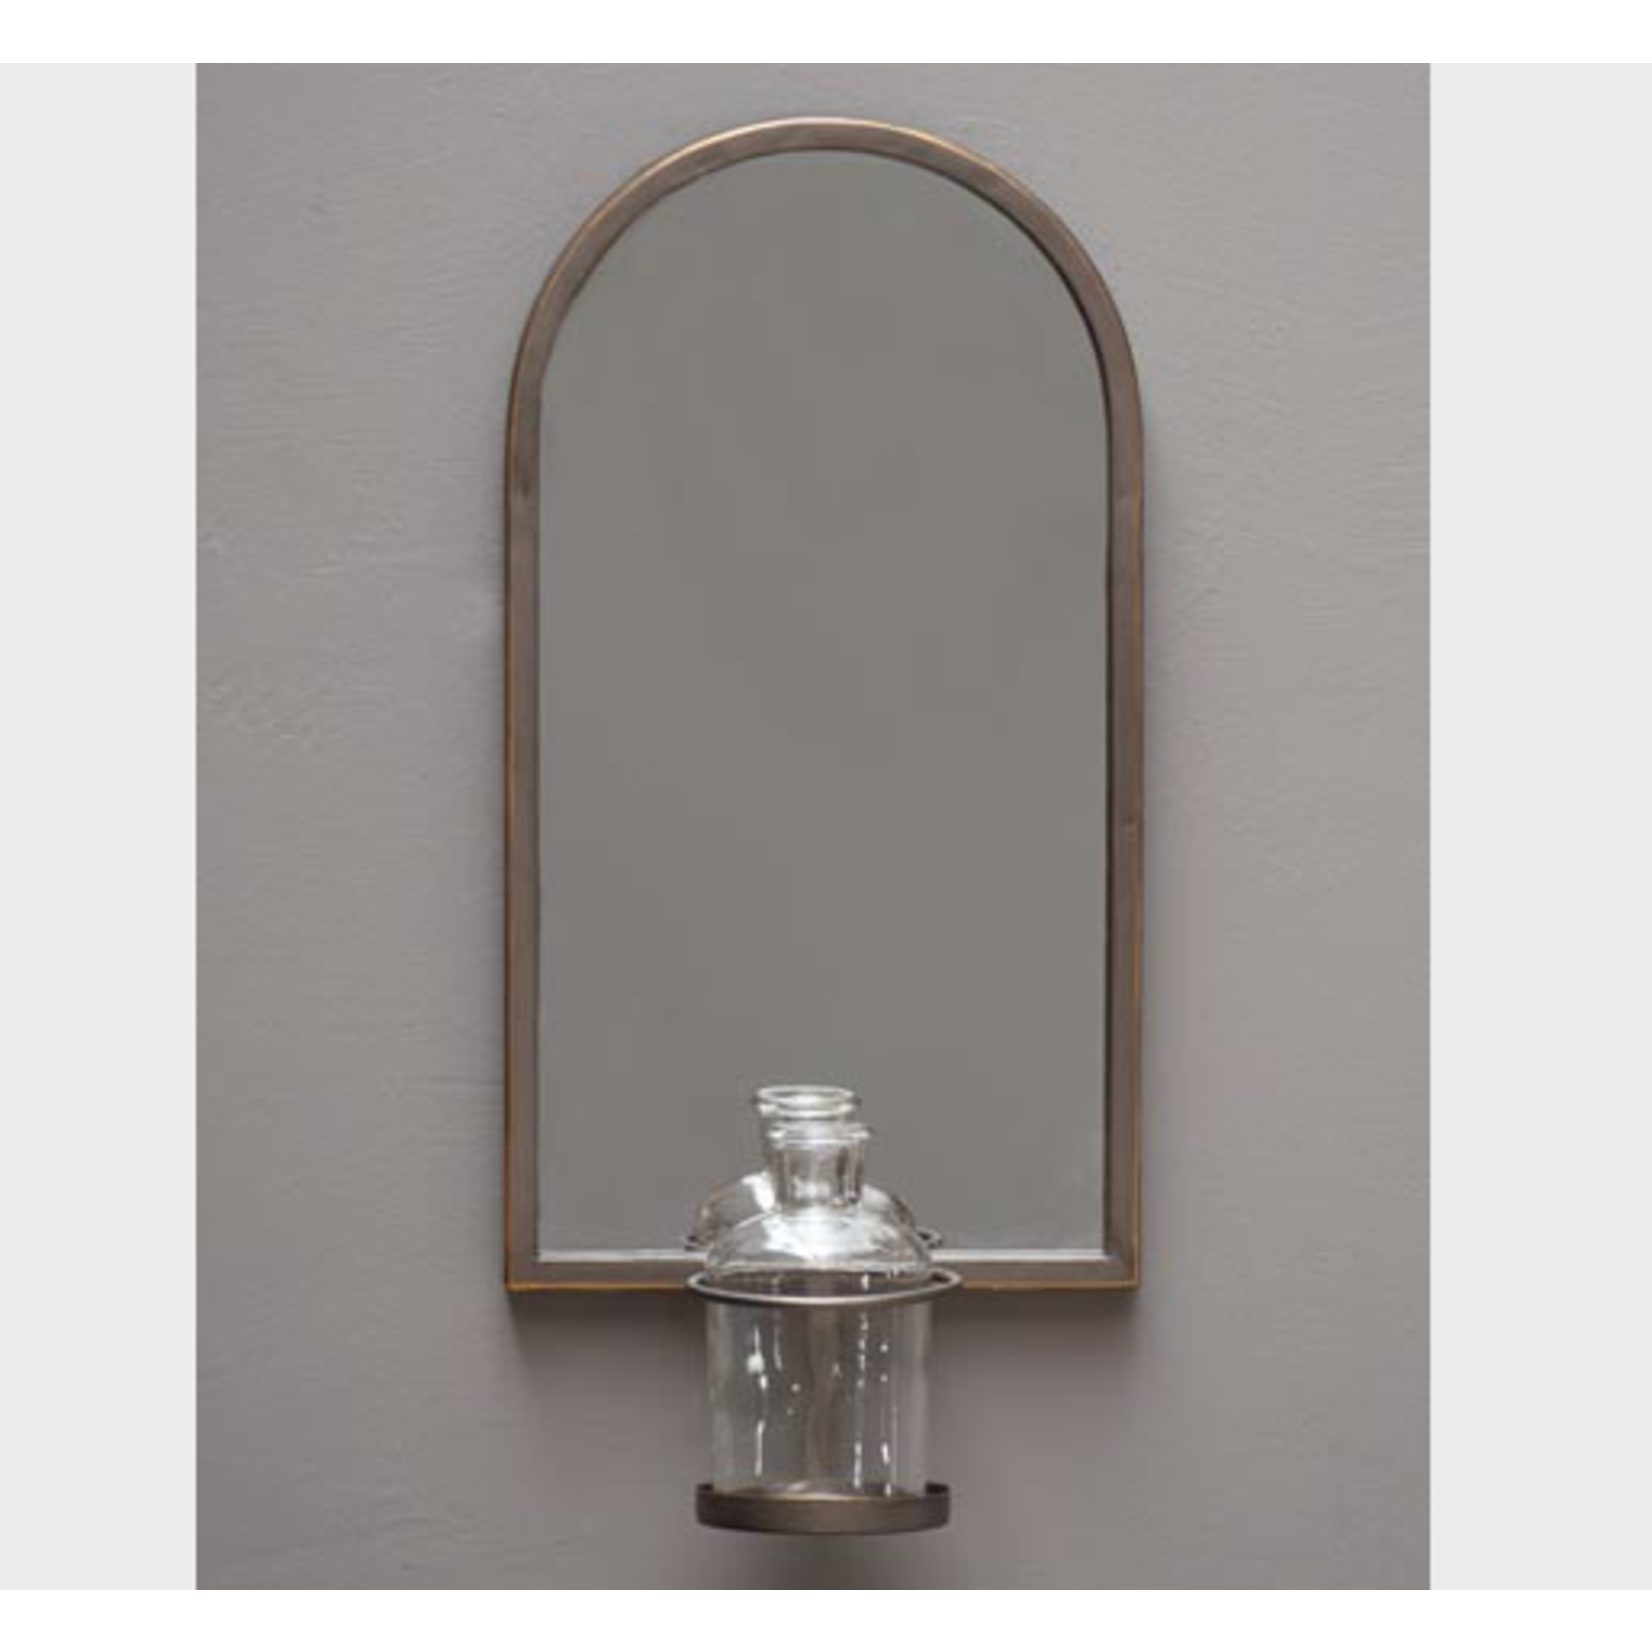 CHEHOMA MIRROR WITH SMALL VASE